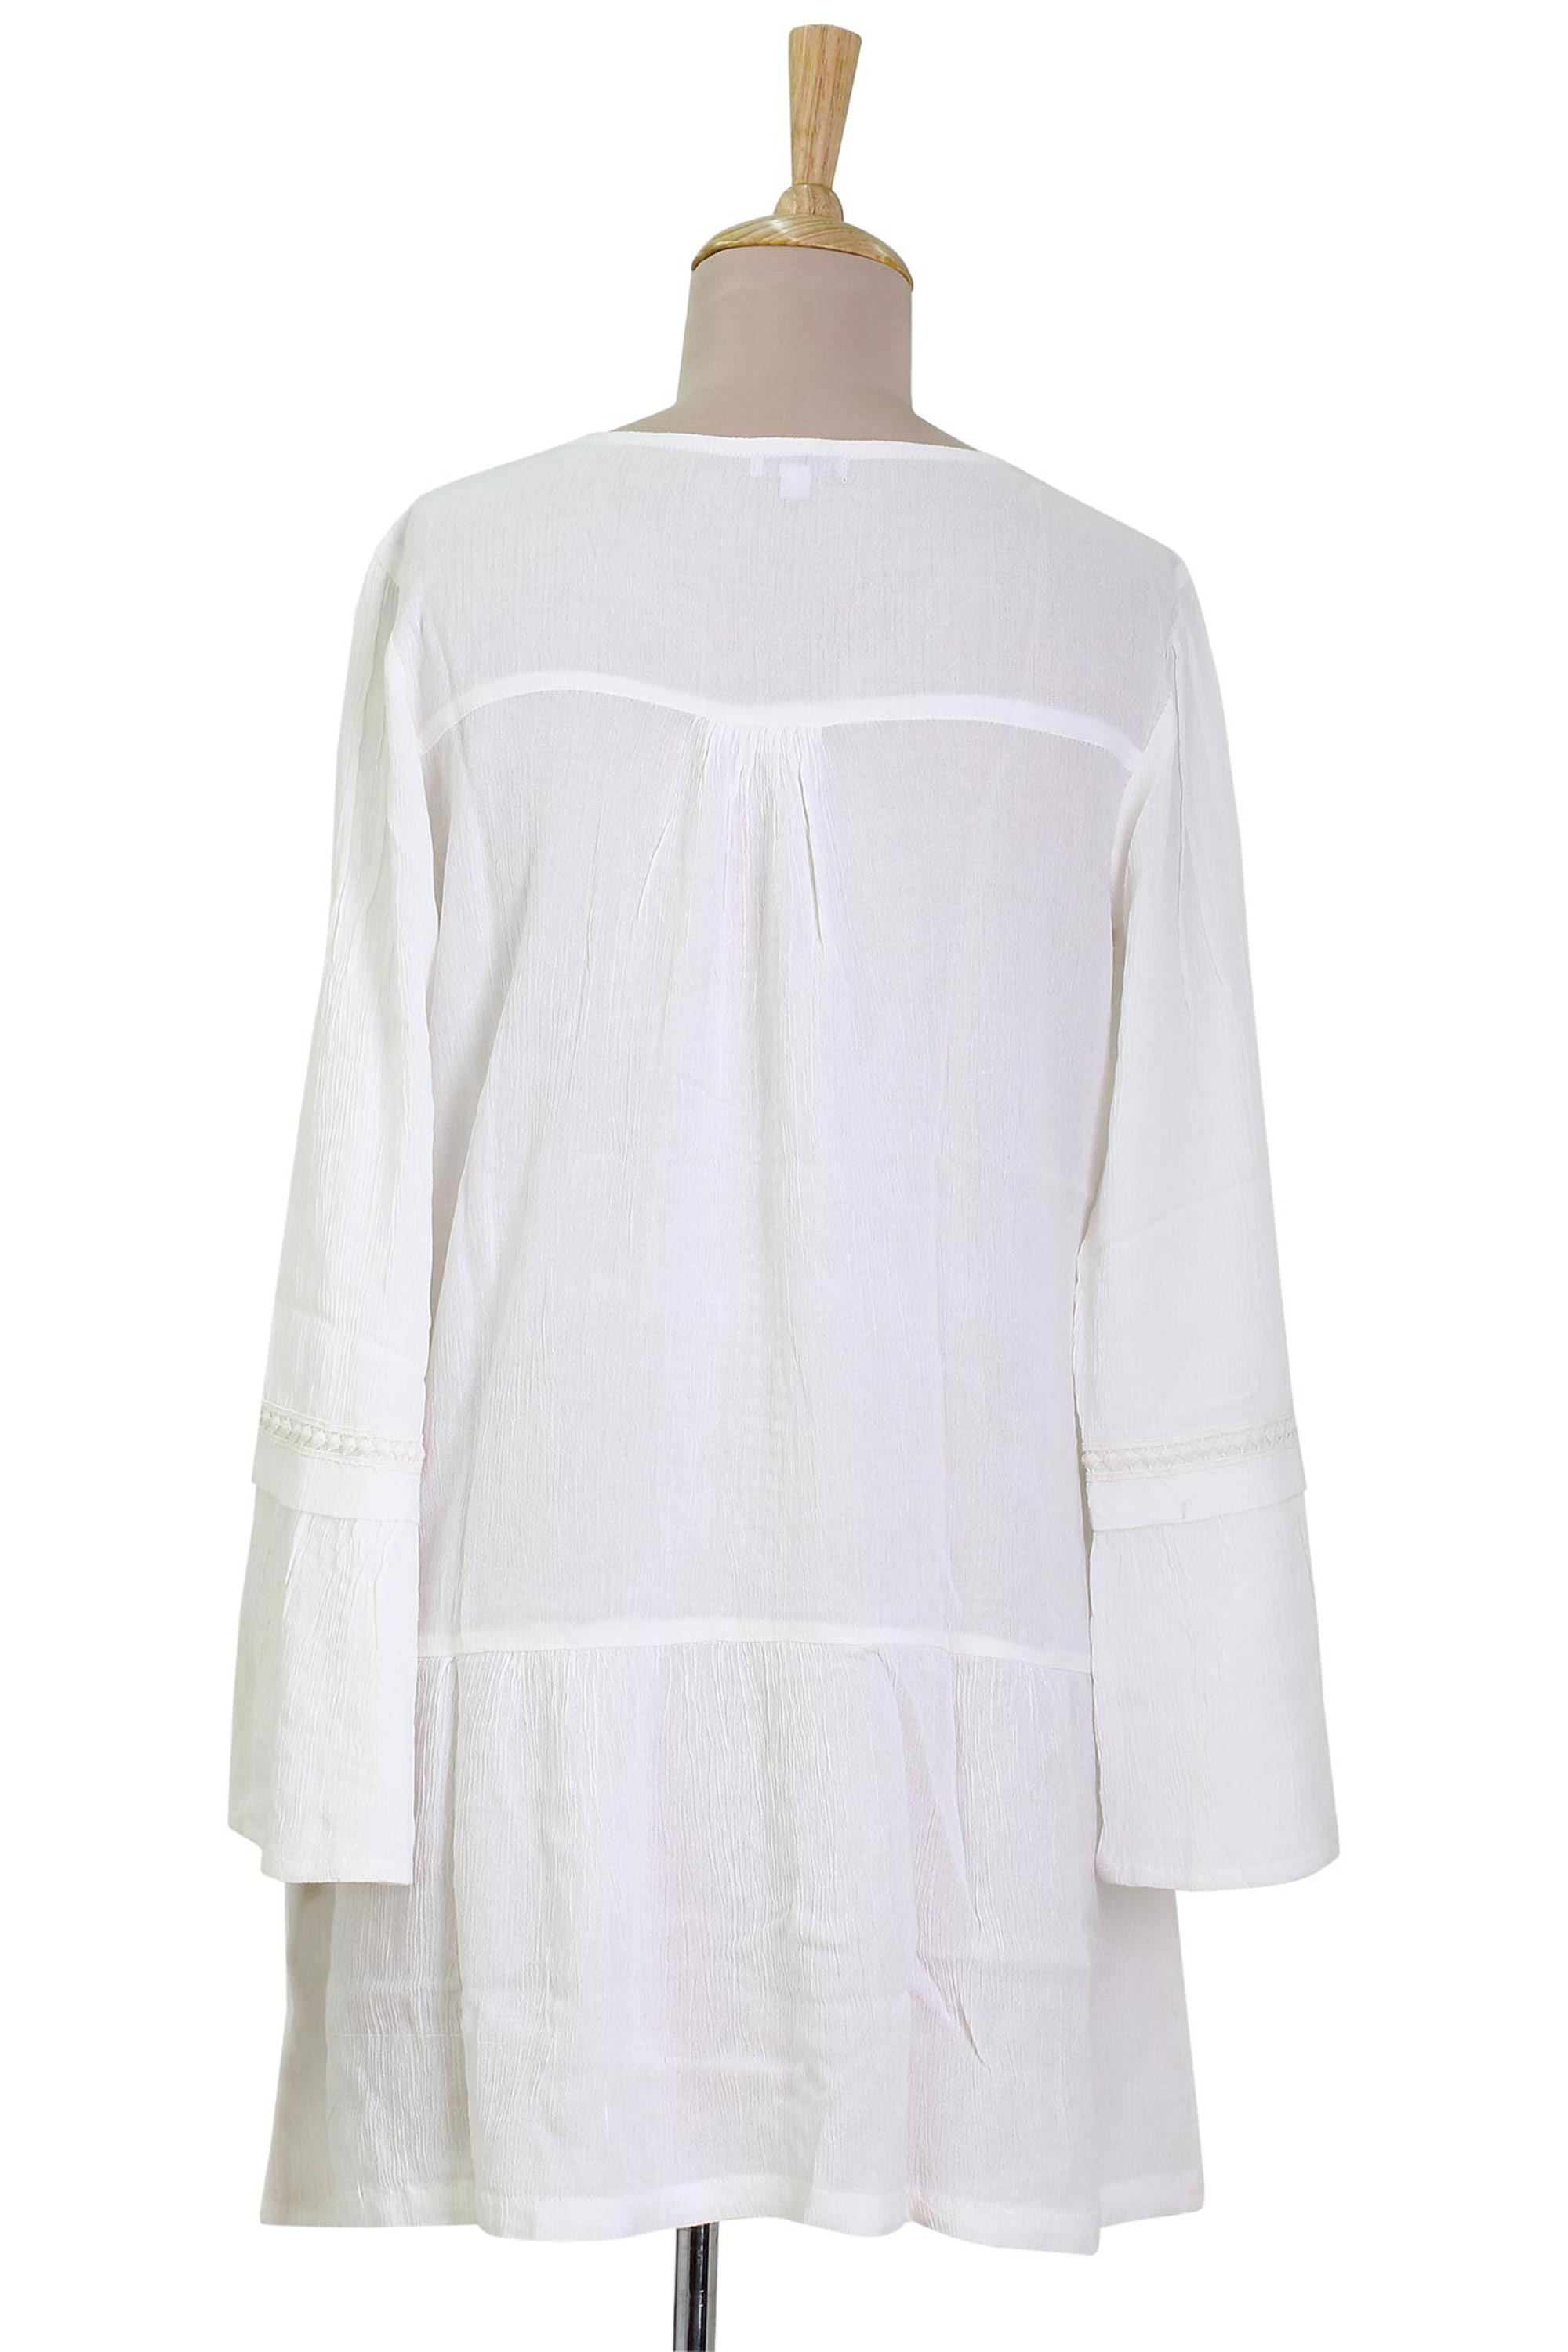 100% Viscose V Neck Tunic in Ivory from India - Sophisticated Charm ...